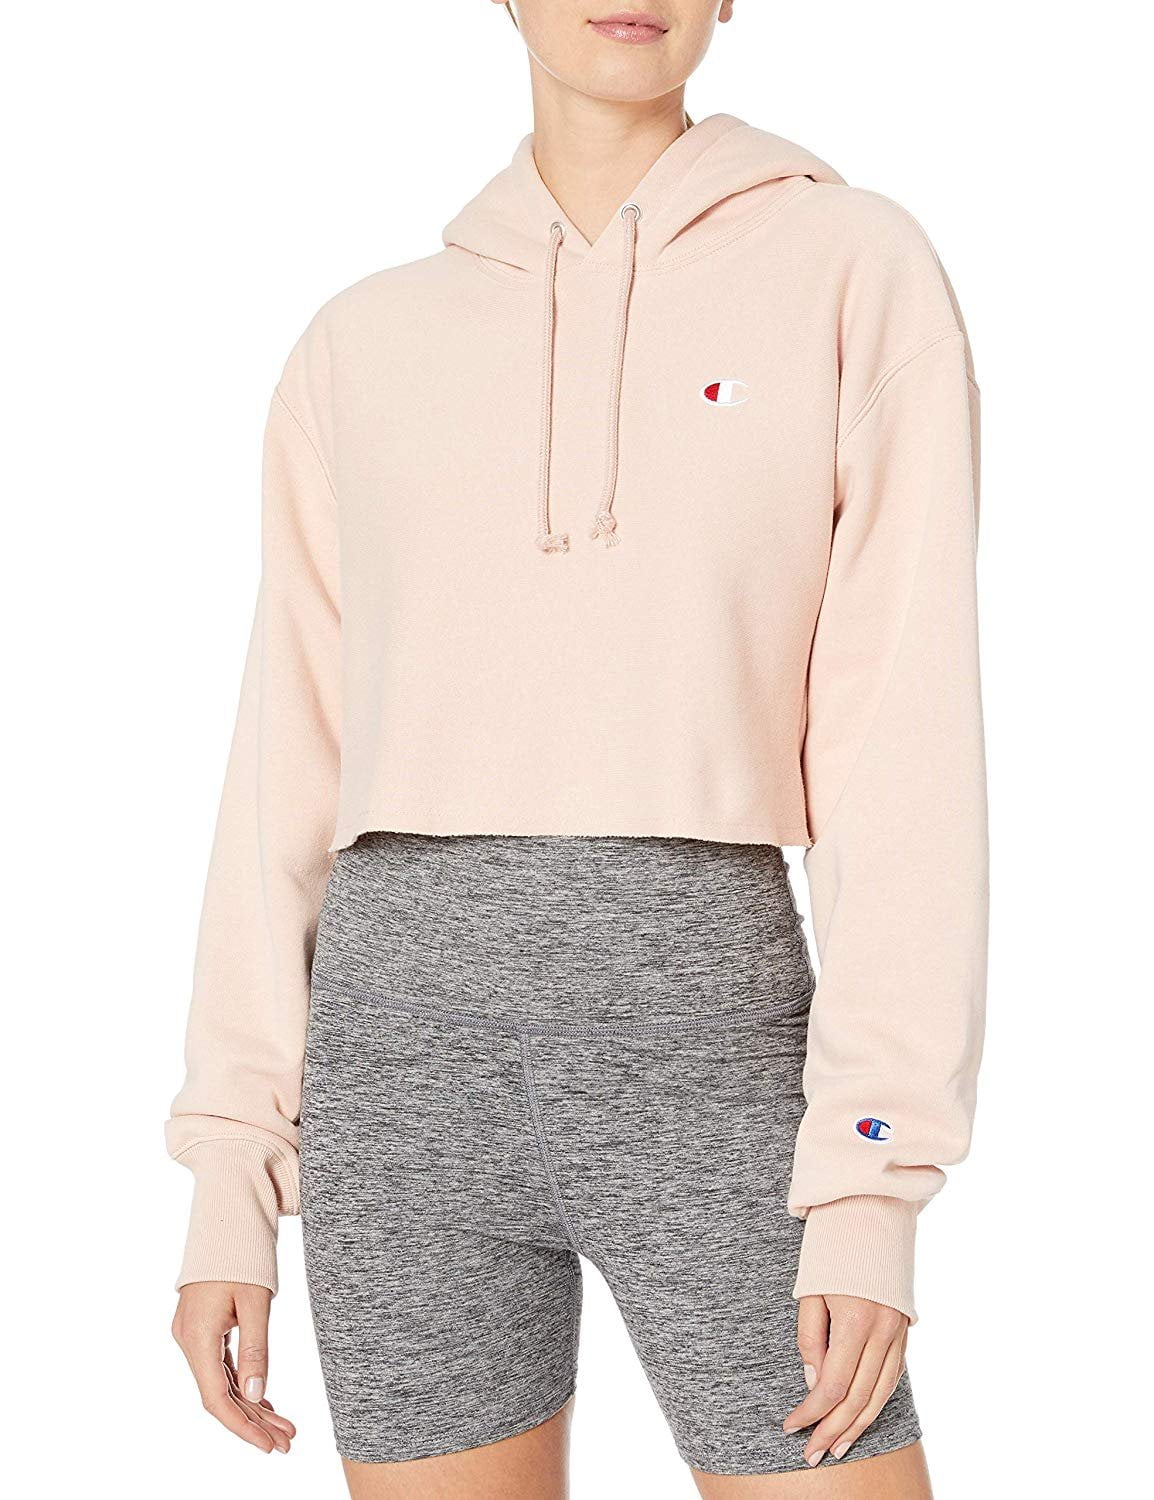 Champion LIFE Reverse Weave Exclusive Hoodie X-Large Spiced almond pink